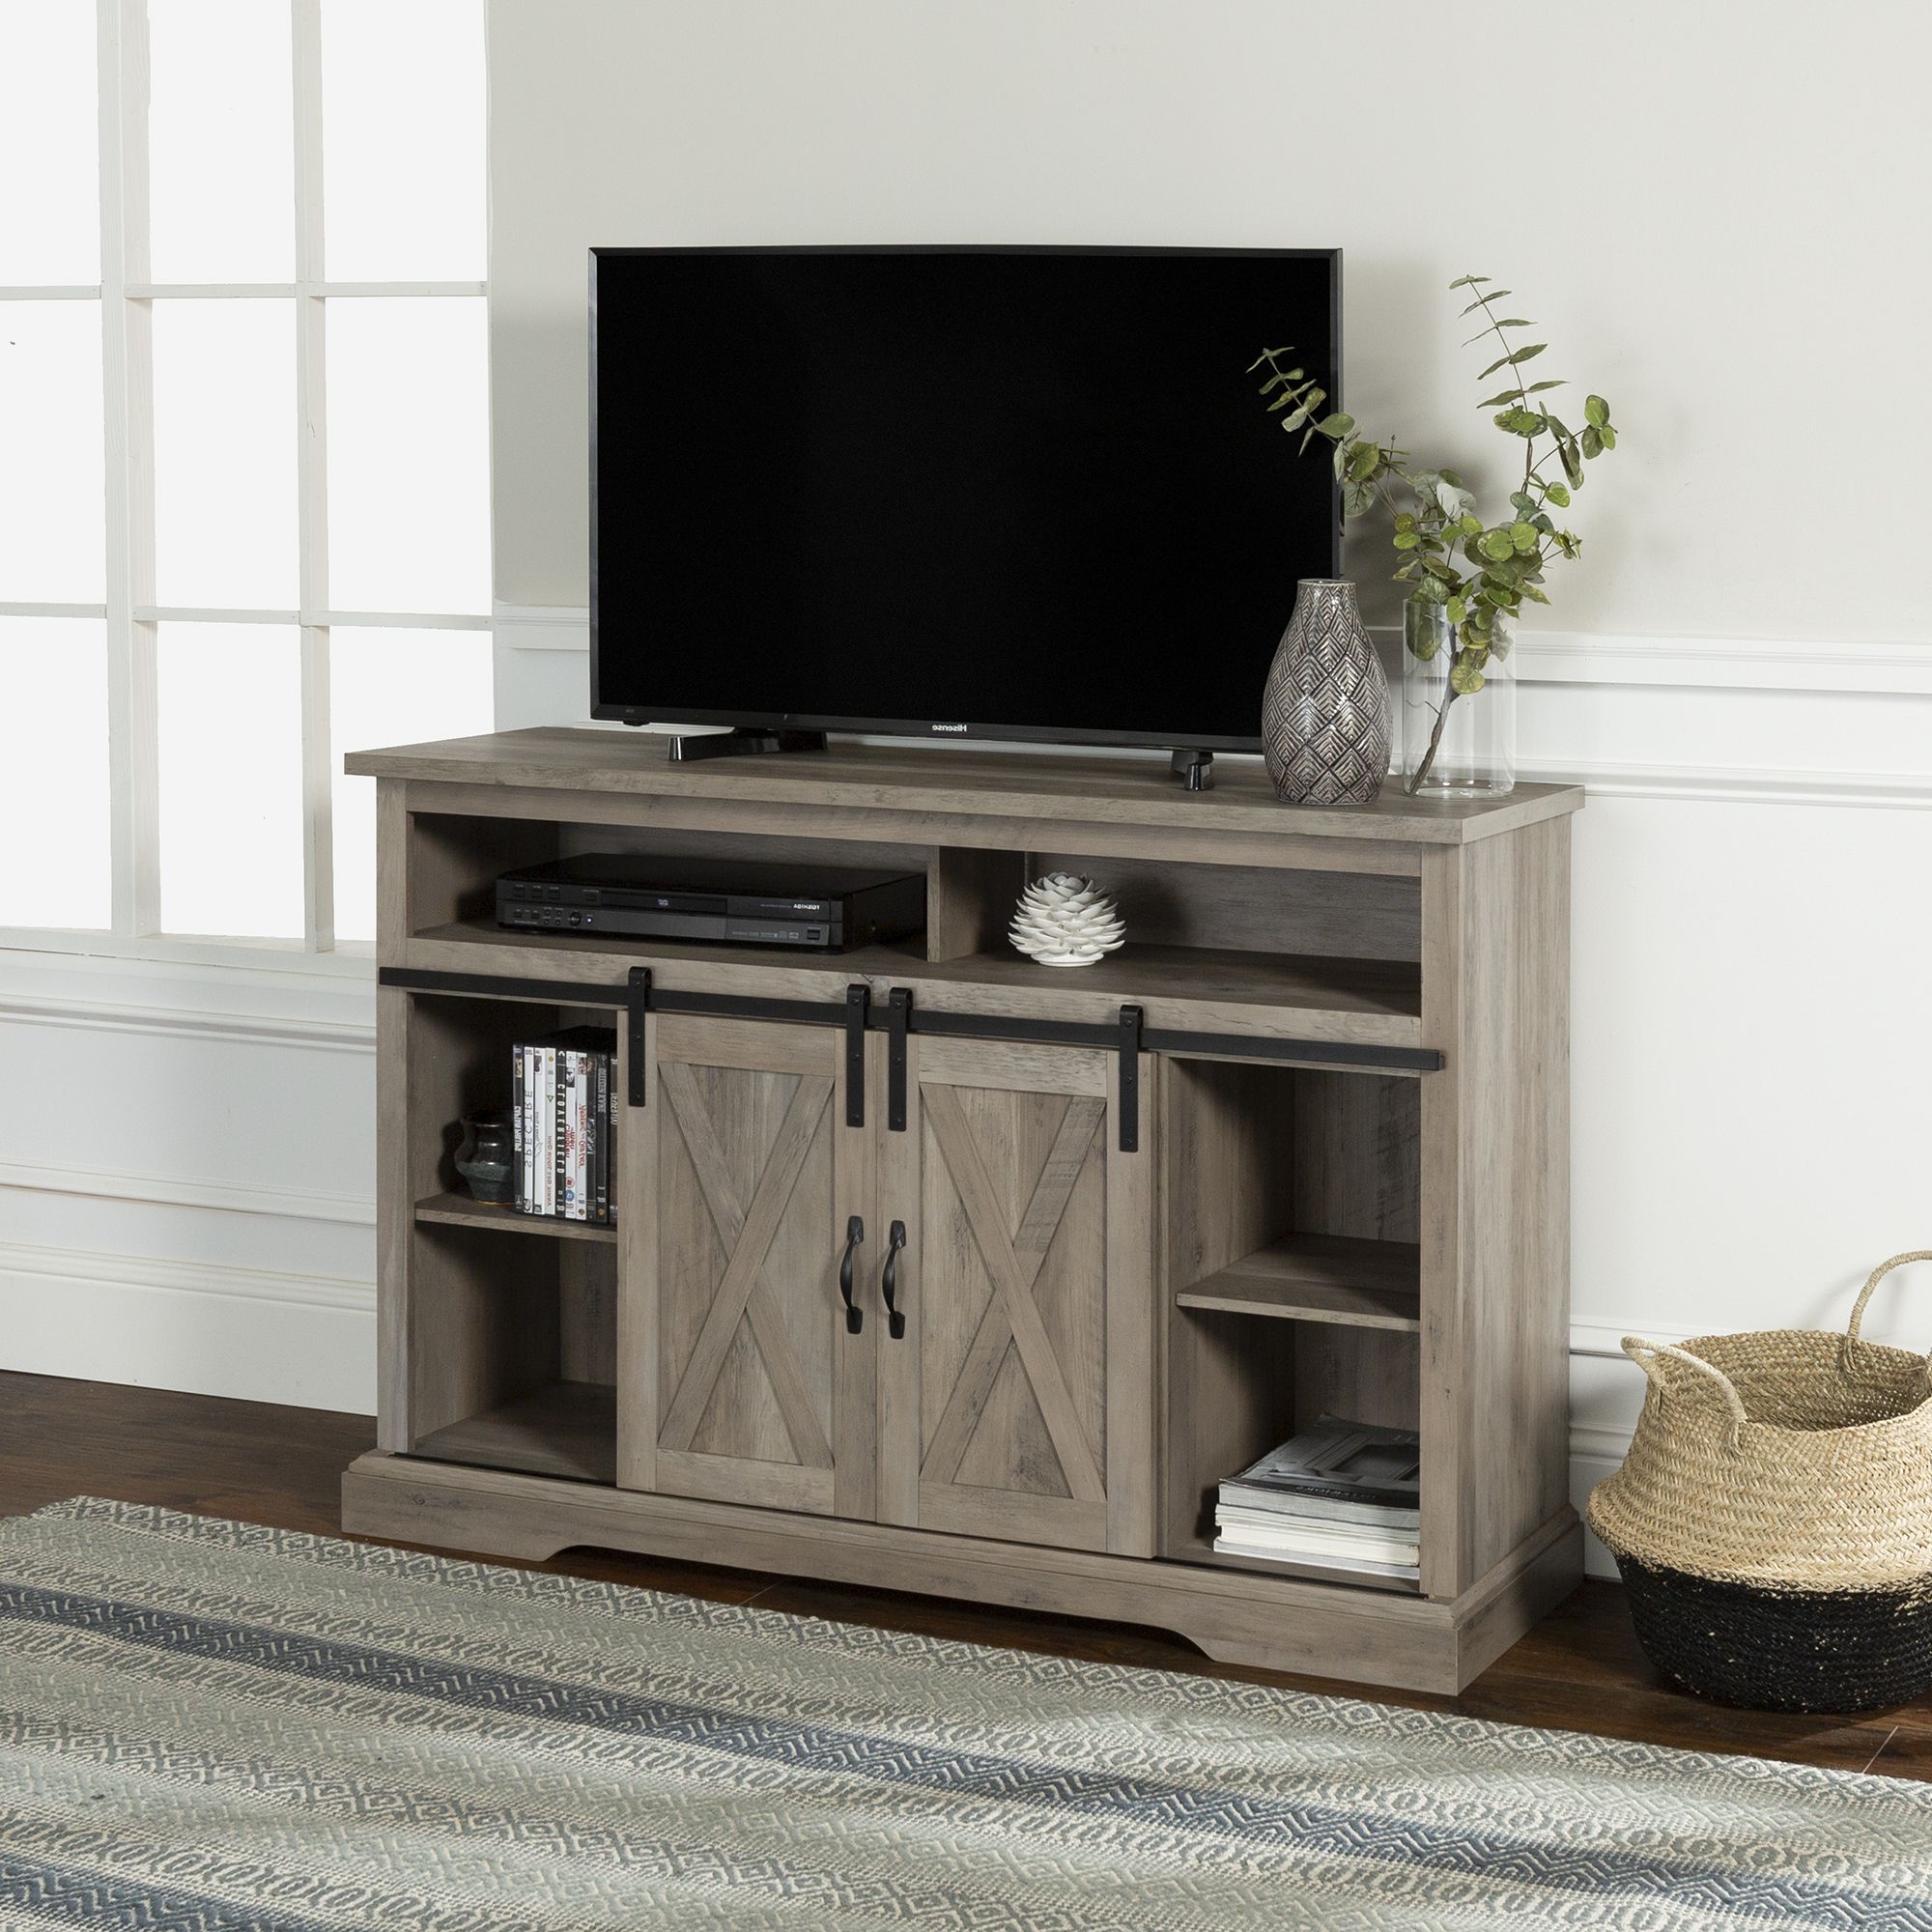 Manor Park Farmhouse Barn Door Tv Stand For Tvs Up To 58 Inside Kamari Tv Stands For Tvs Up To 58" (View 5 of 20)